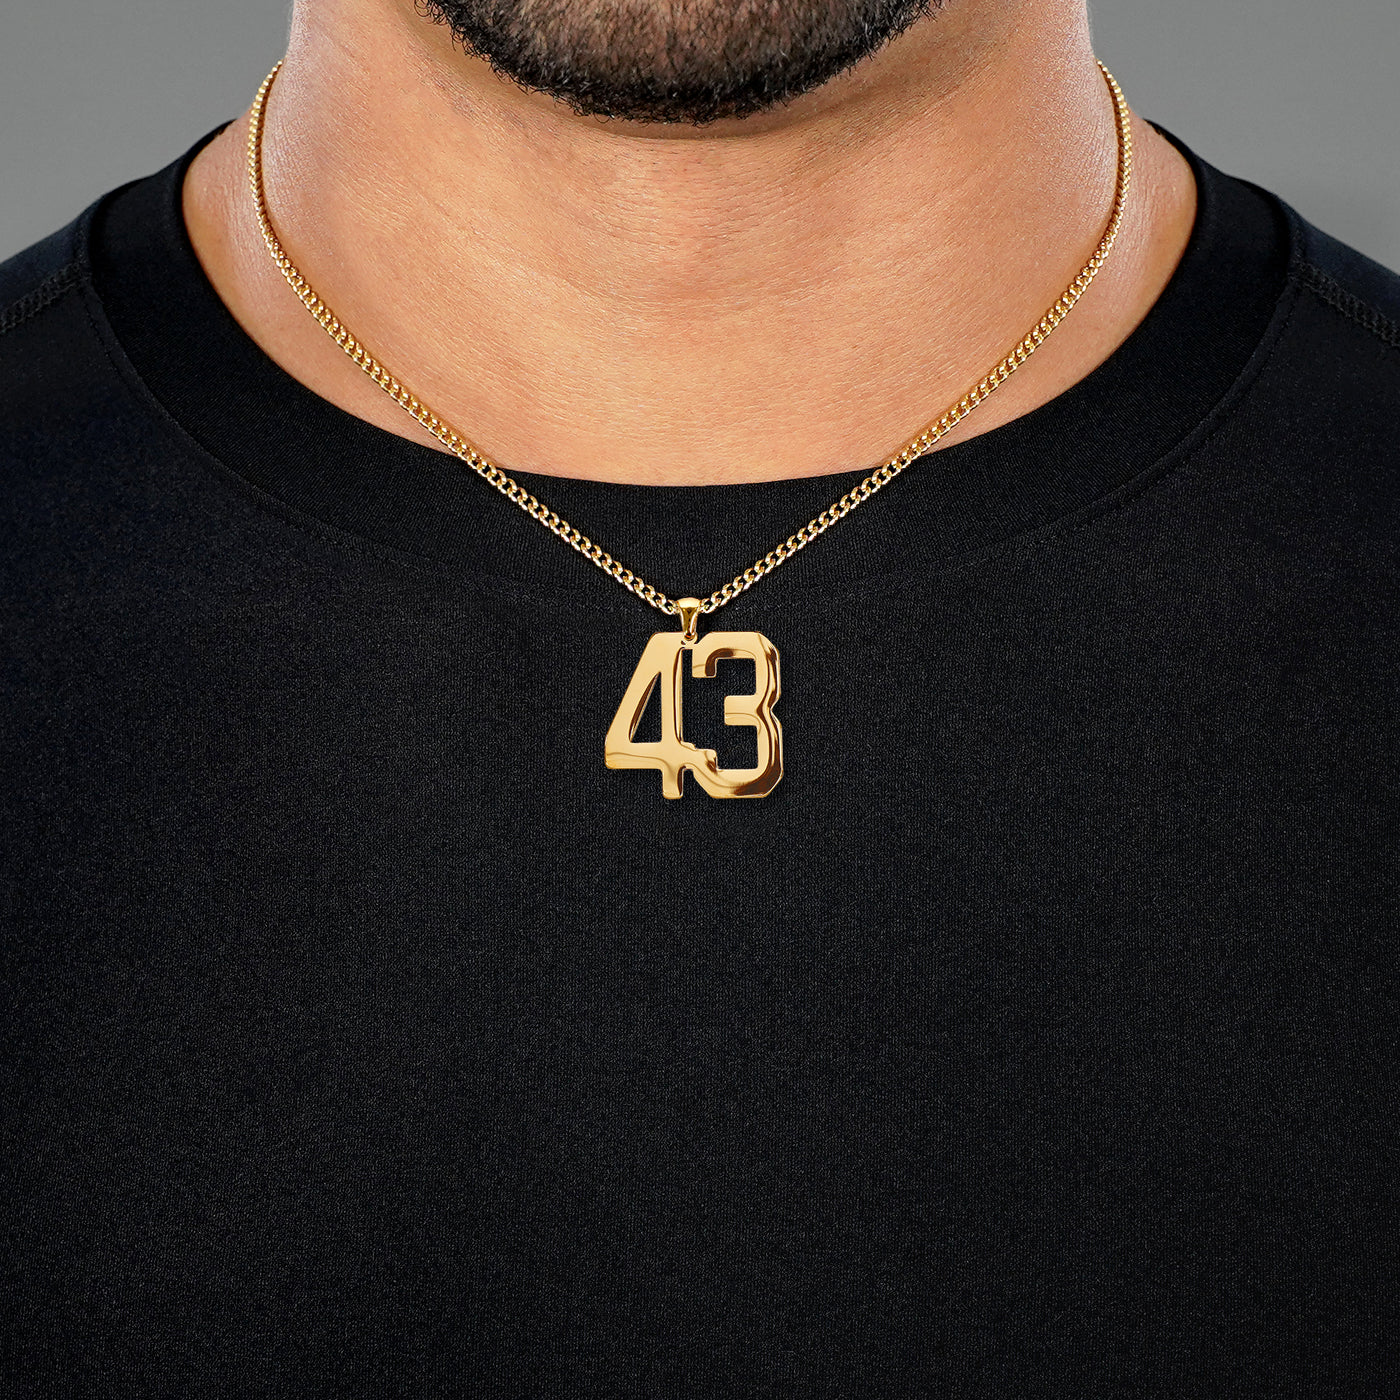 43 Number Pendant with Chain Necklace - Gold Plated Stainless Steel